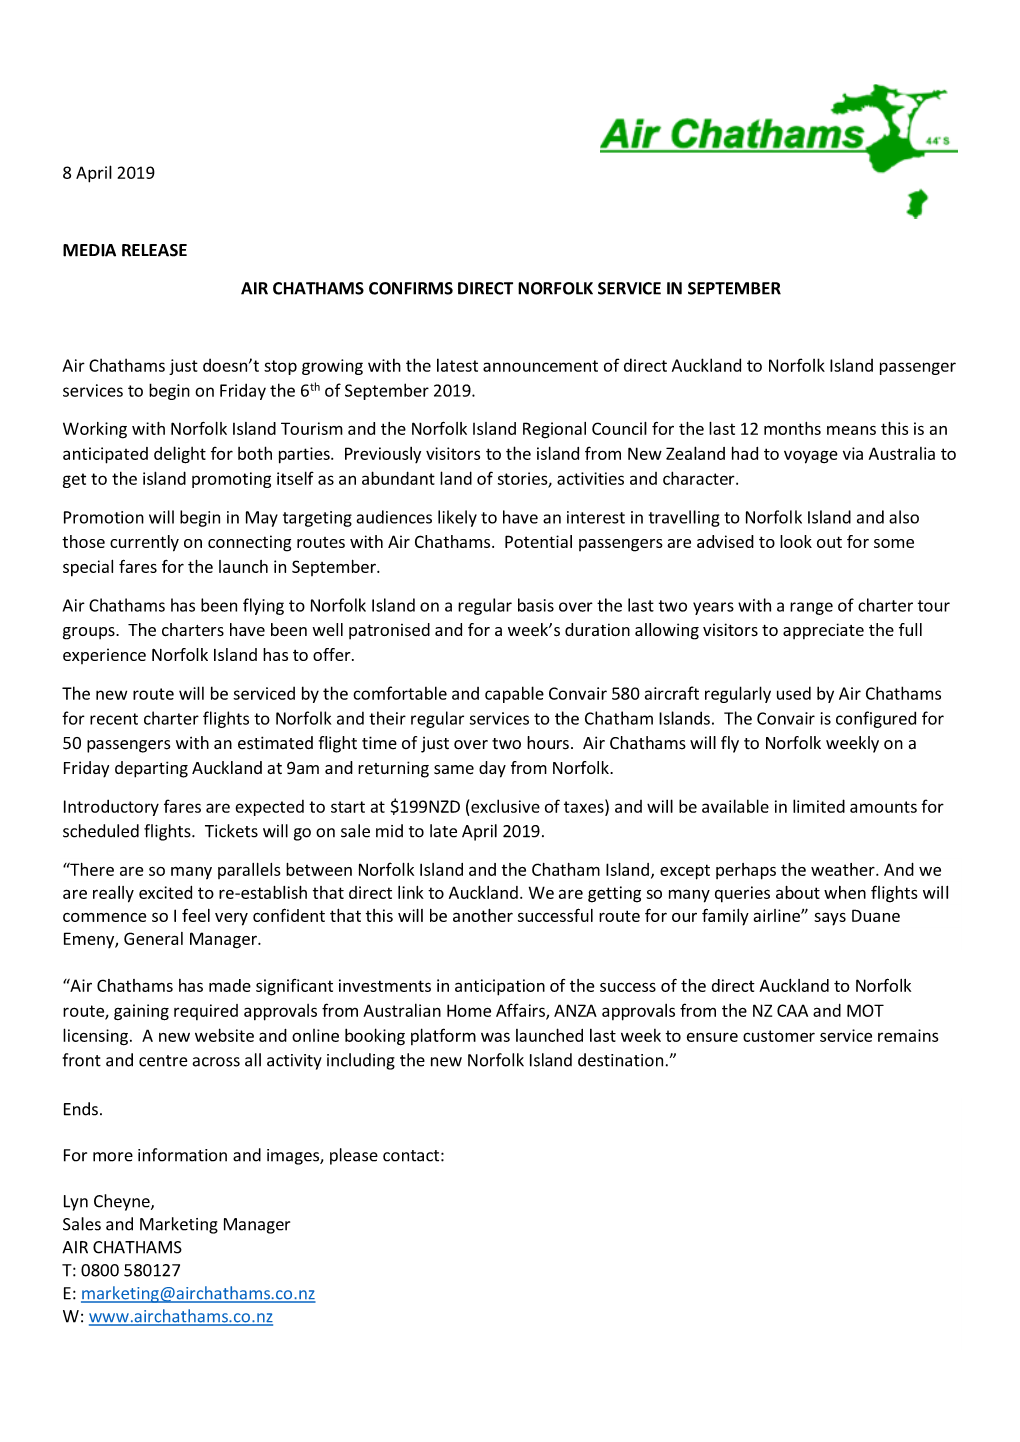 8 April 2019 MEDIA RELEASE AIR CHATHAMS CONFIRMS DIRECT